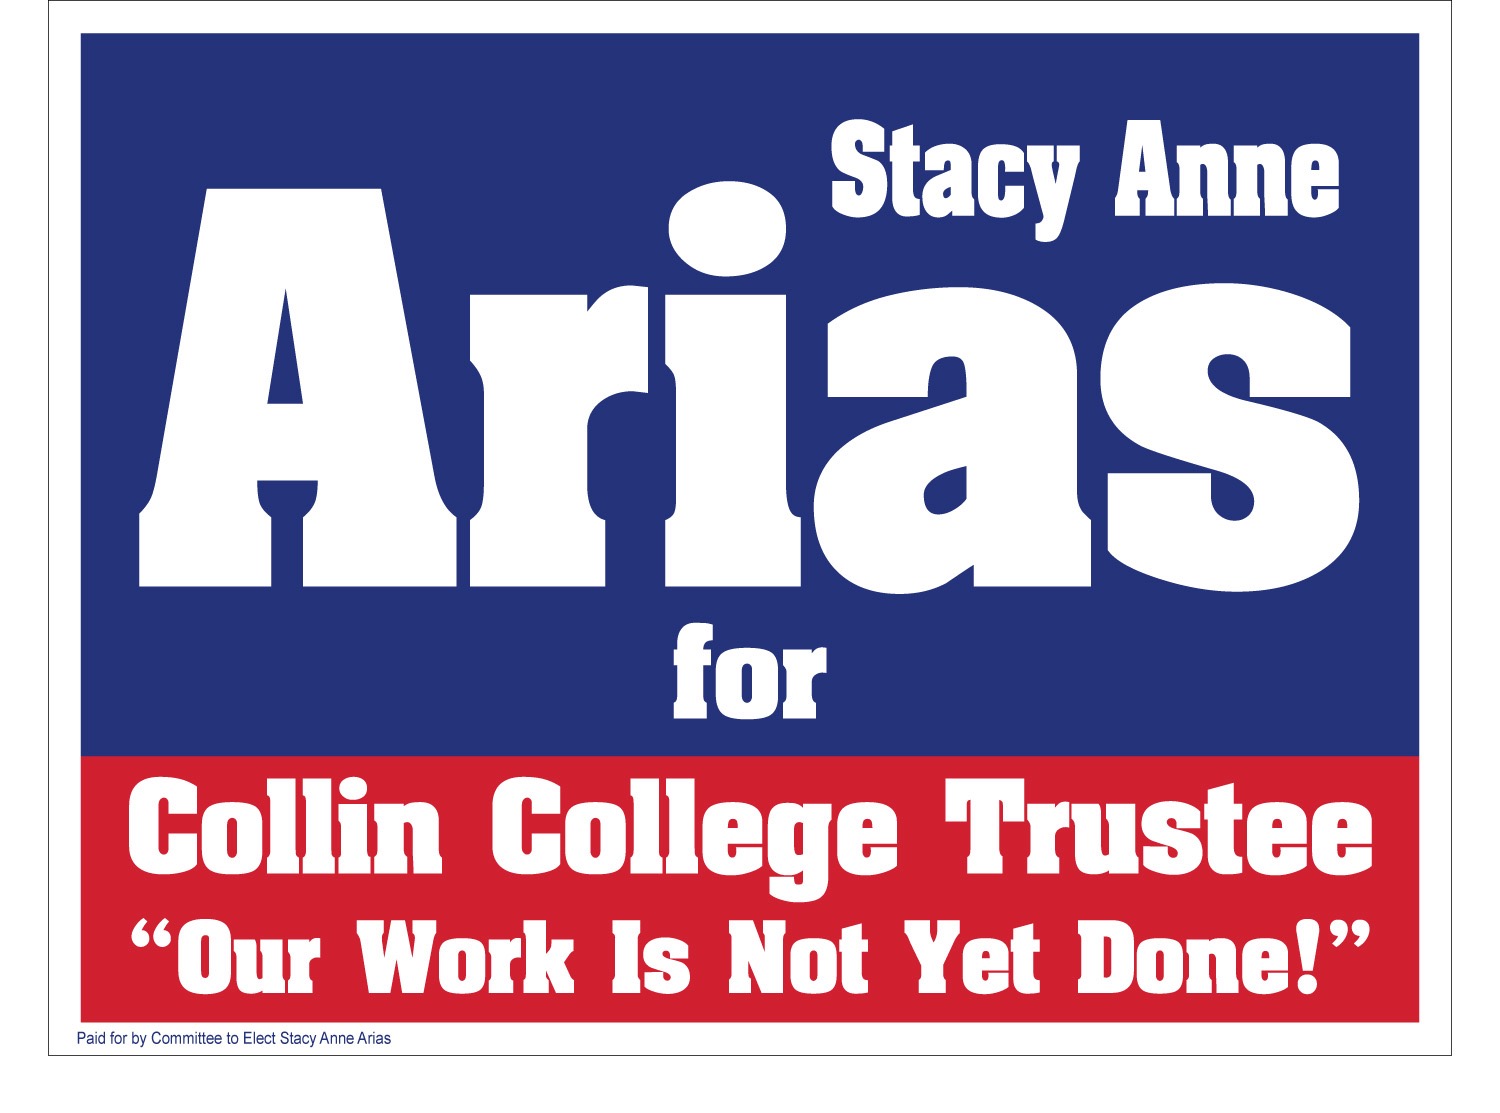 Stacy Anne Arias for Collin College Board of Trustees logo